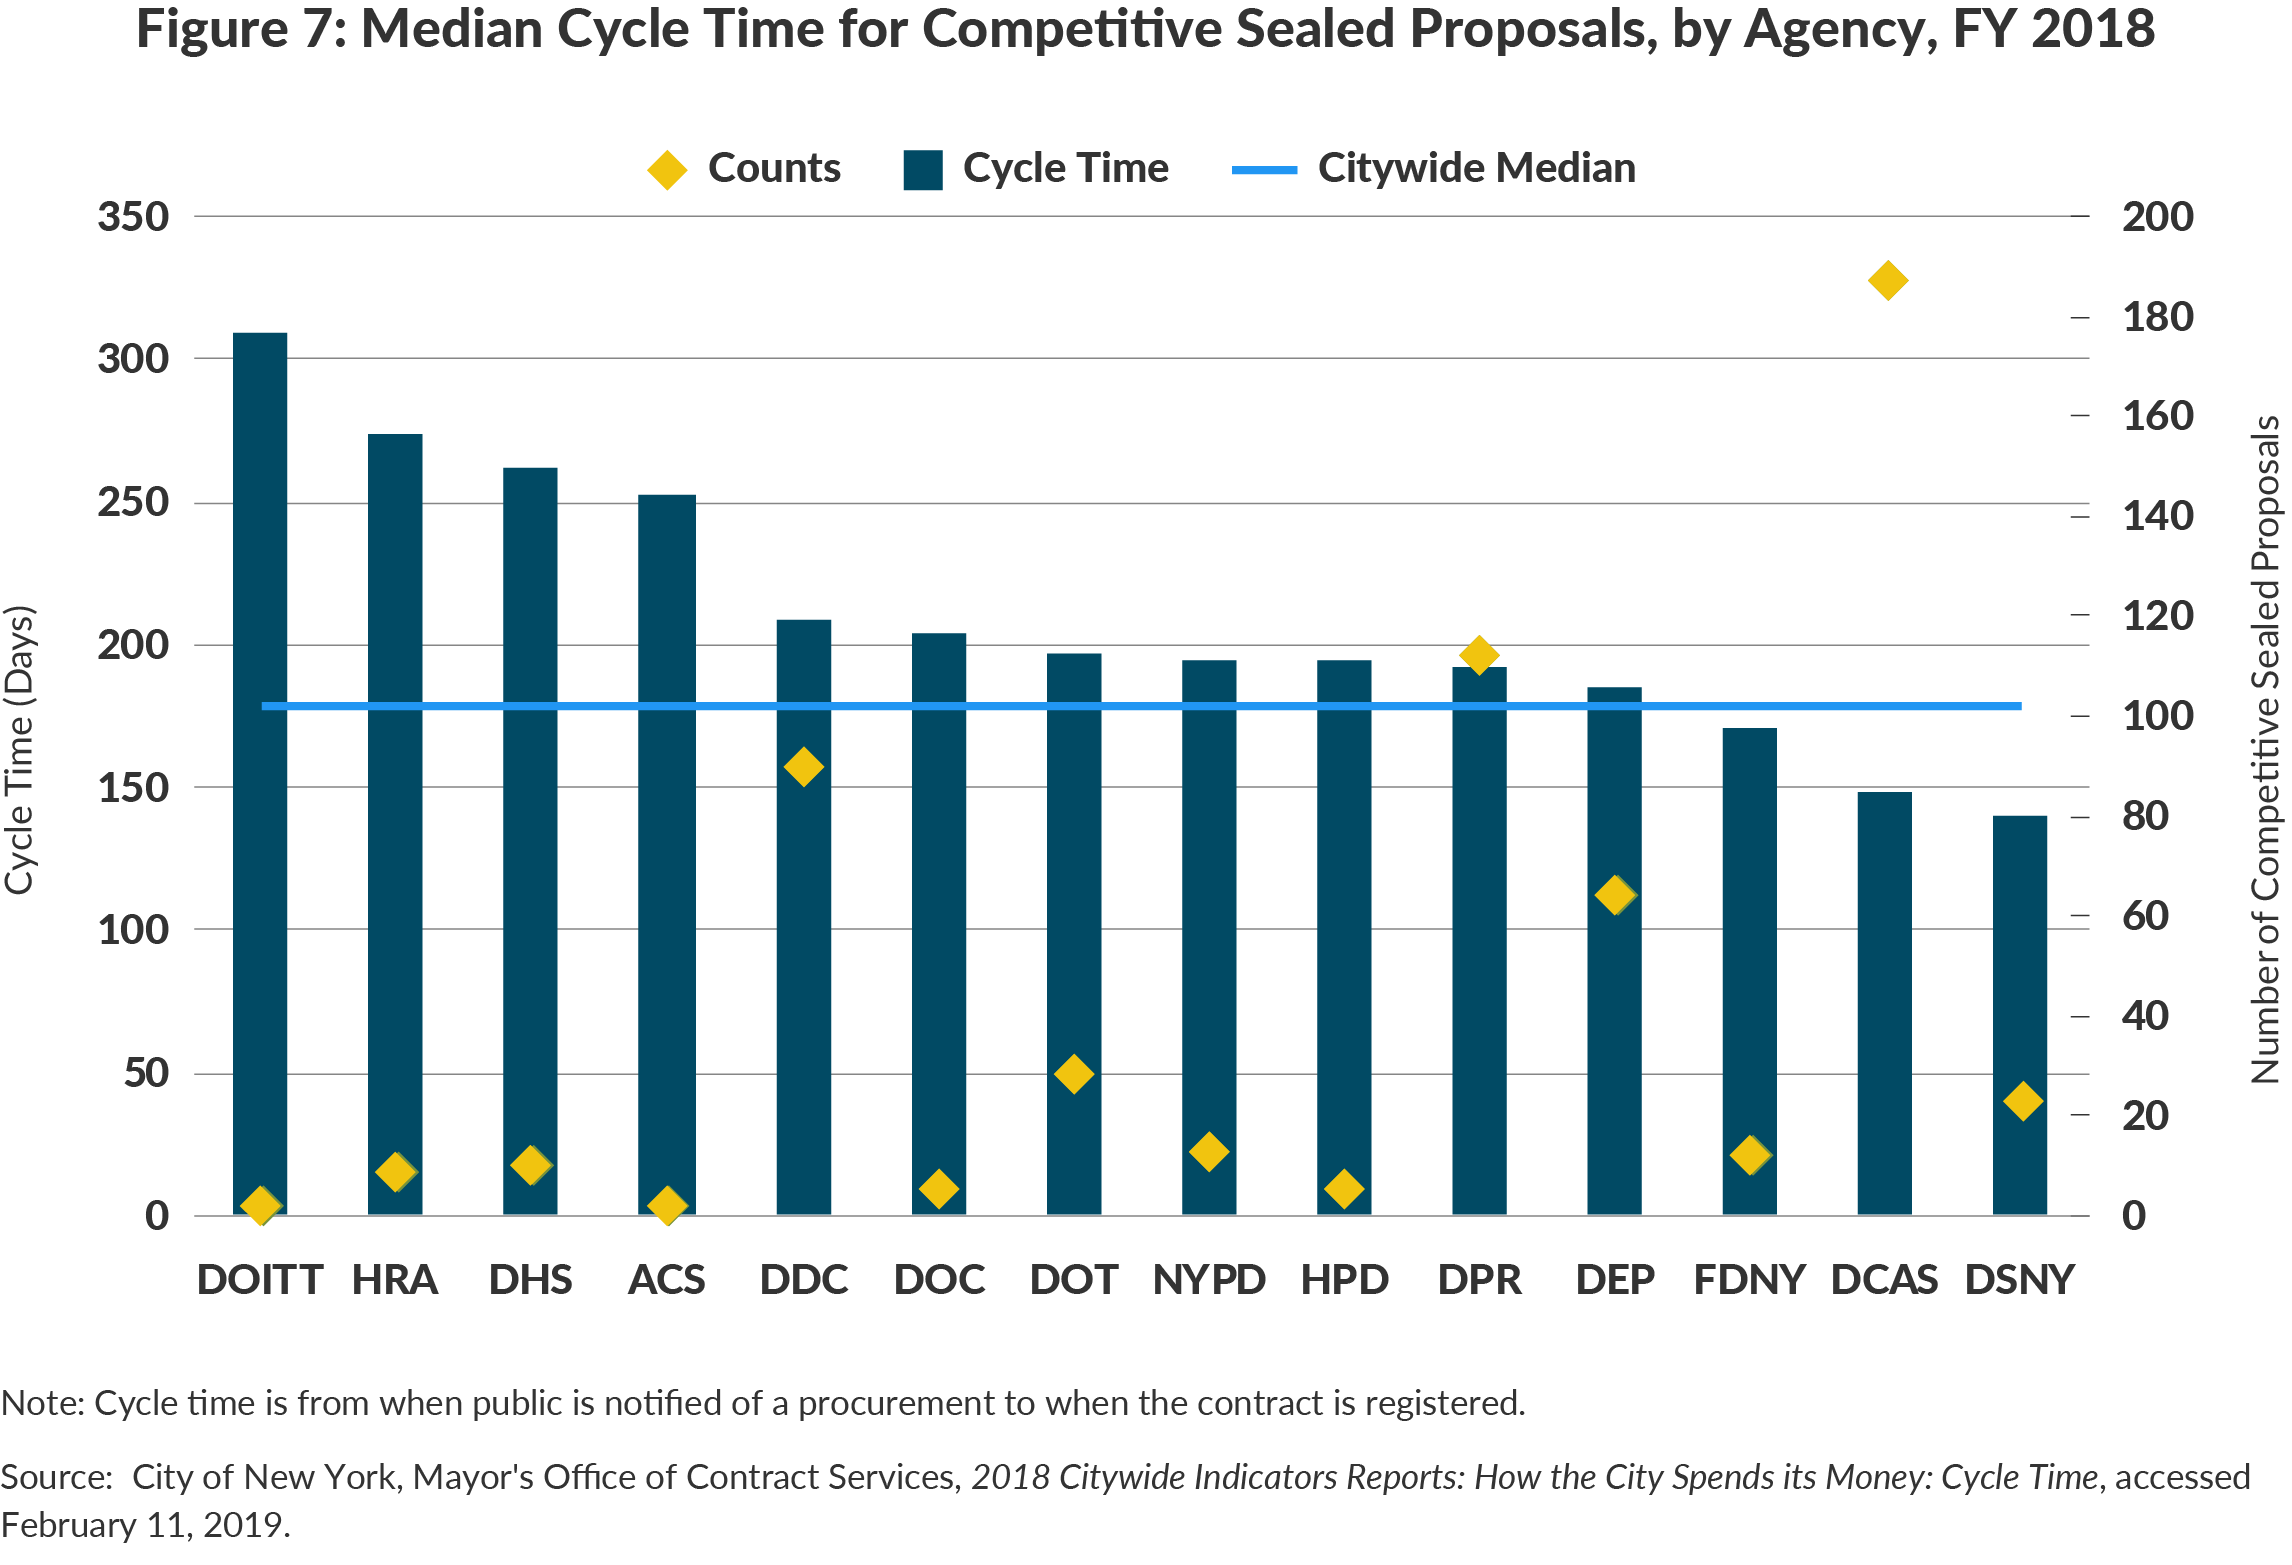 Figure 7: Median Cycle Time for Competitive Sealed Proposals, by Agency, FY 2018